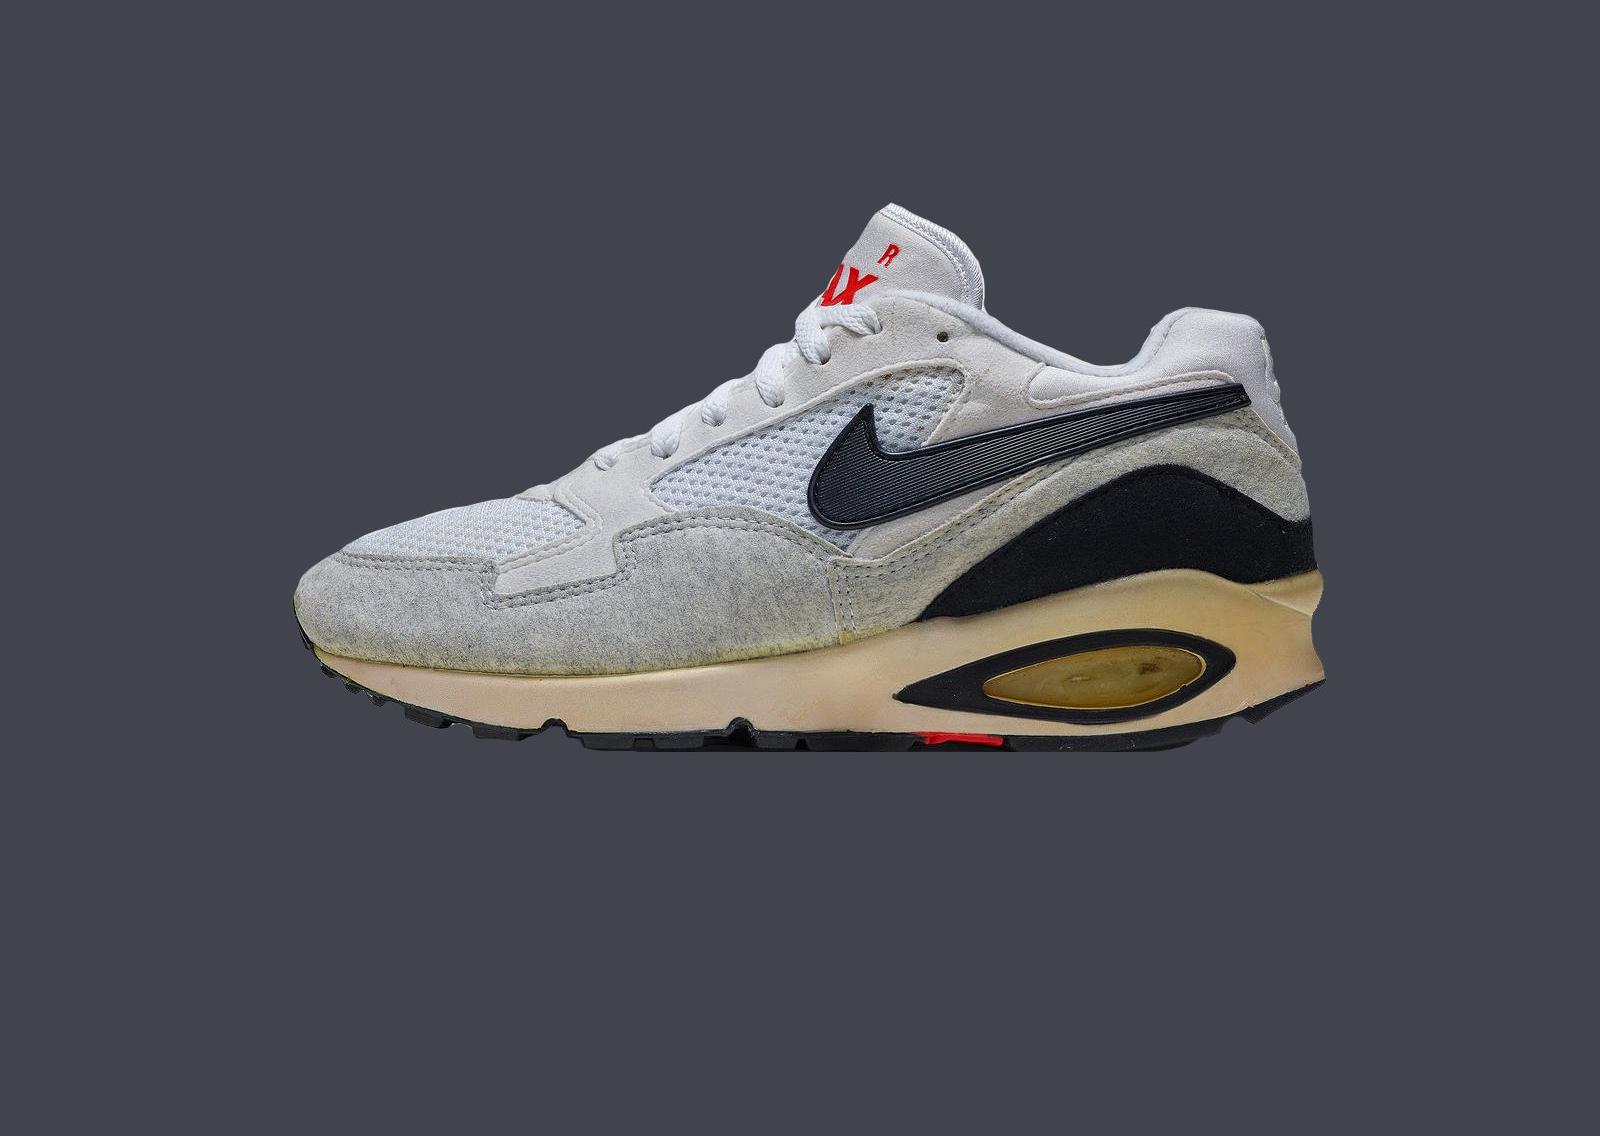 sociaal Doe alles met mijn kracht overdrijving The History and Evolution of Nike&#8217;s Air Max Line